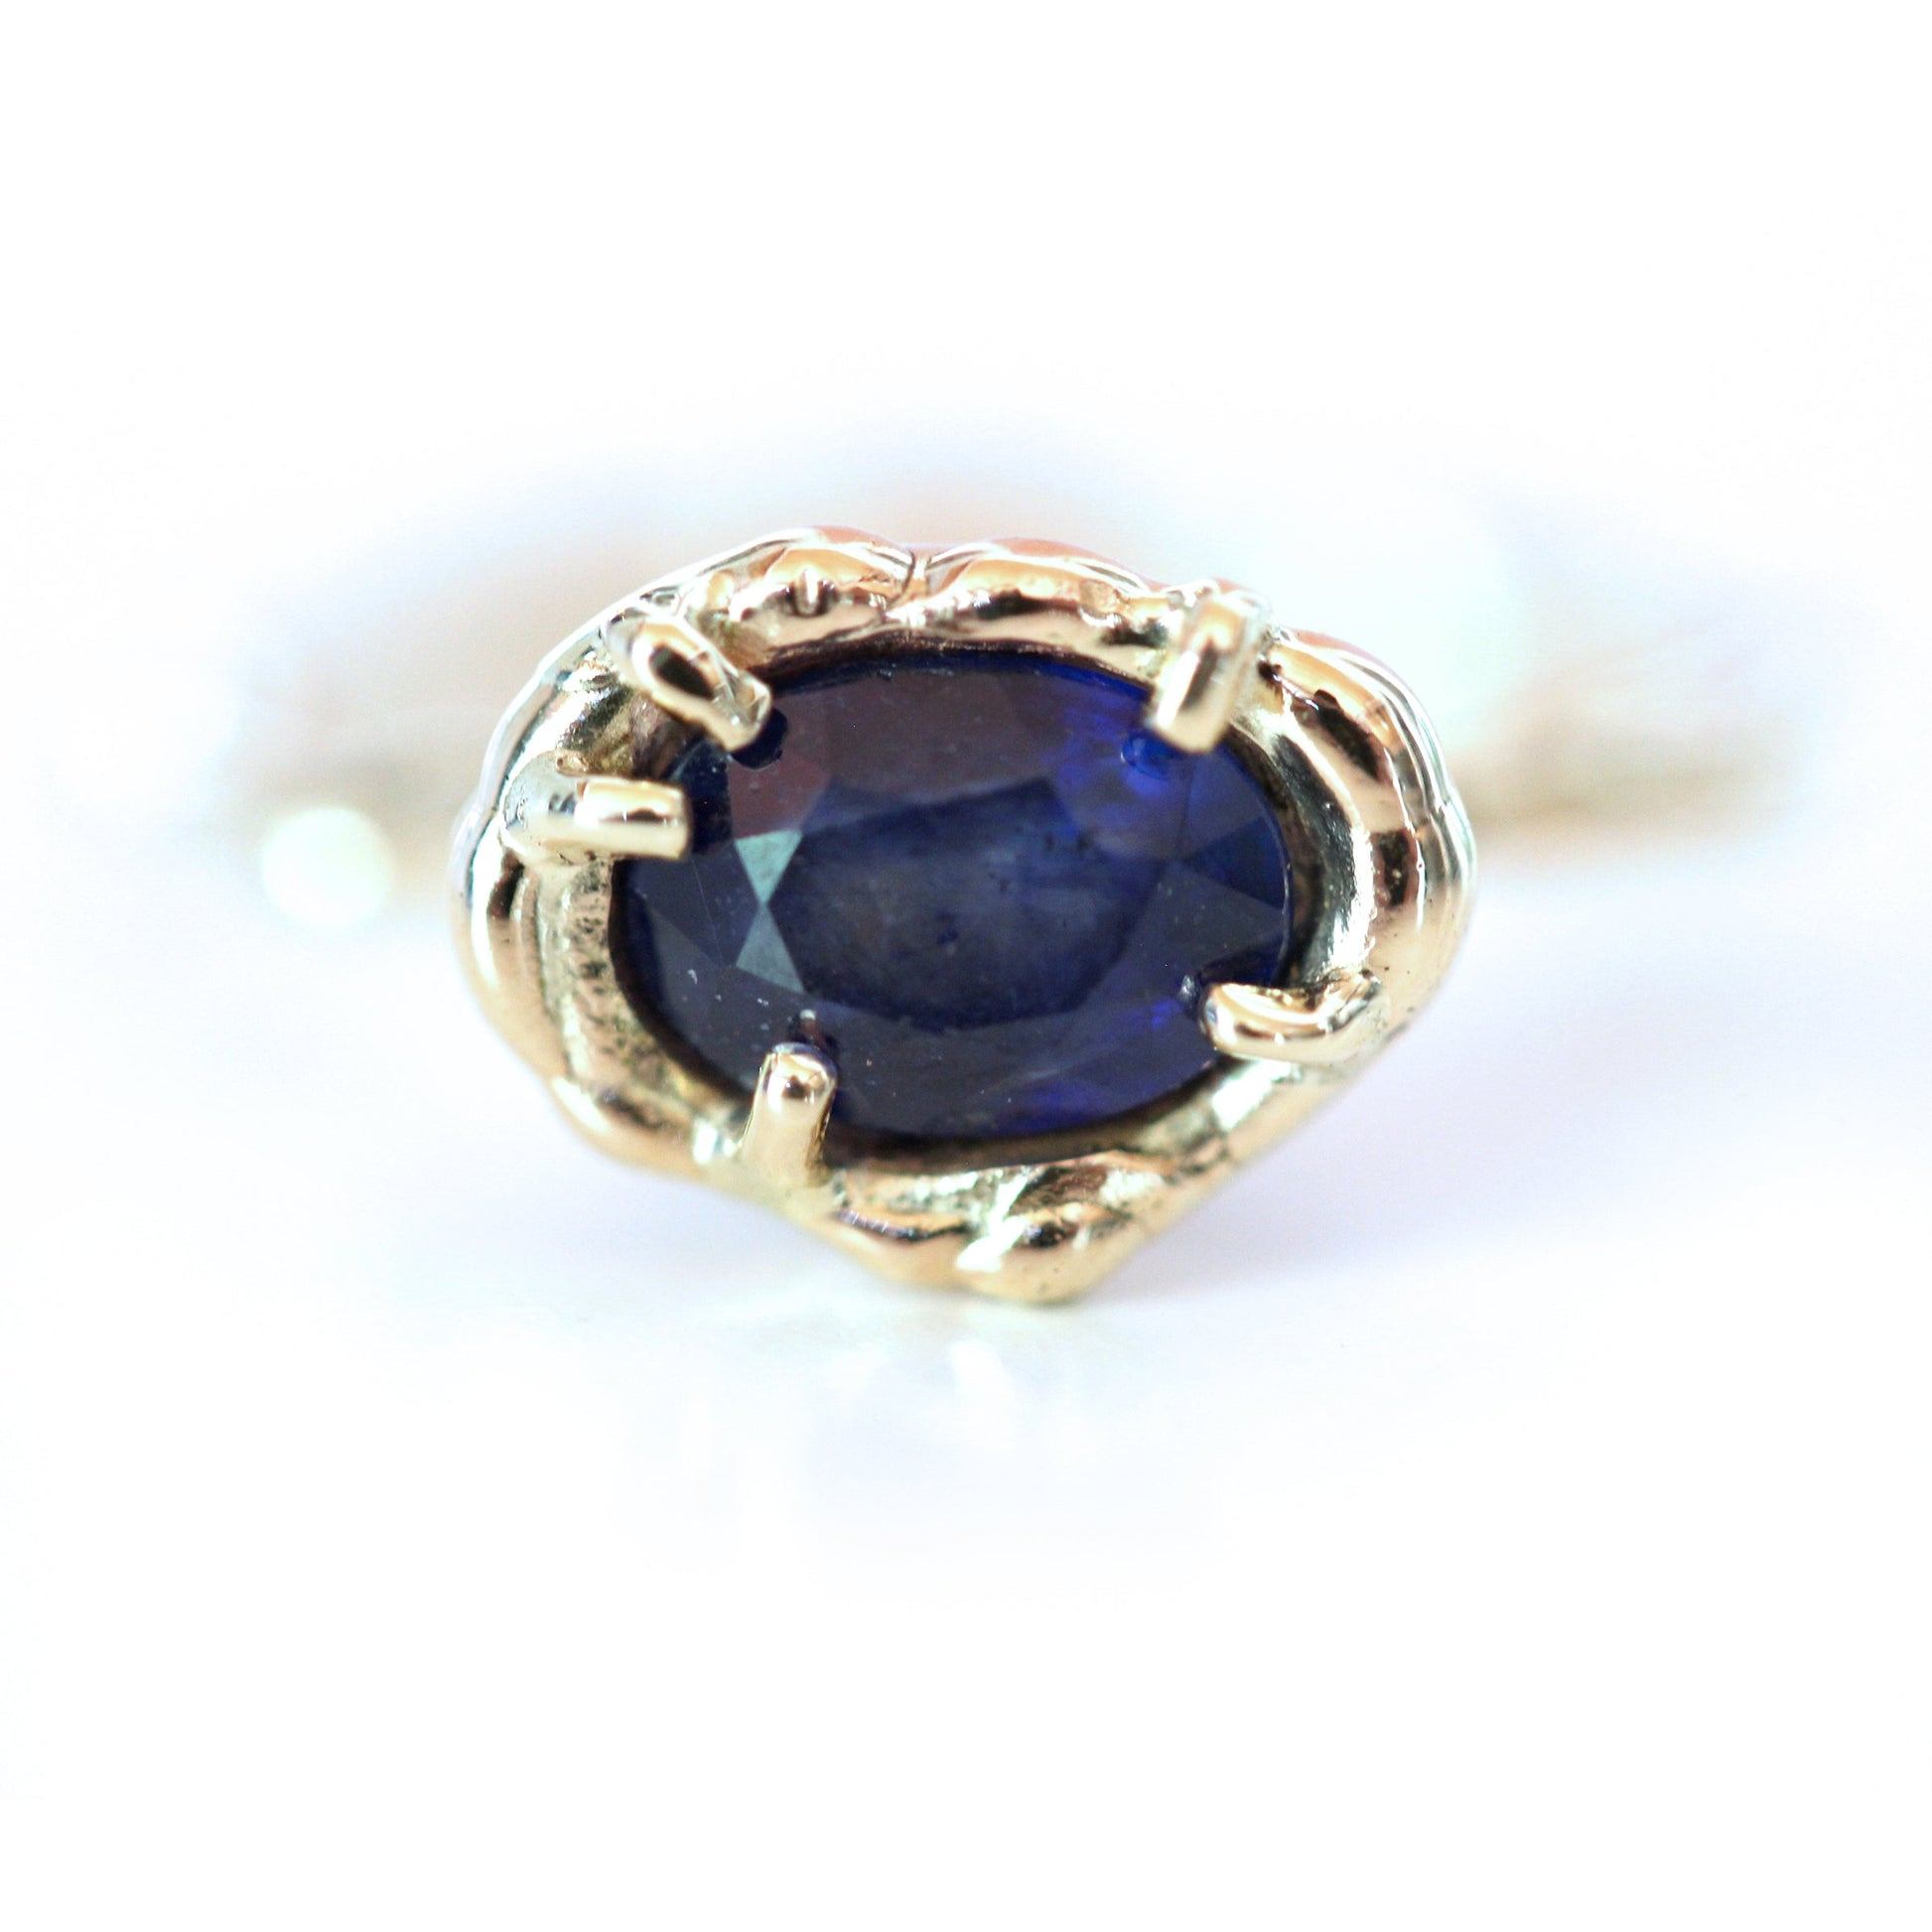 Close up view of sapphire in Gianna Ring.